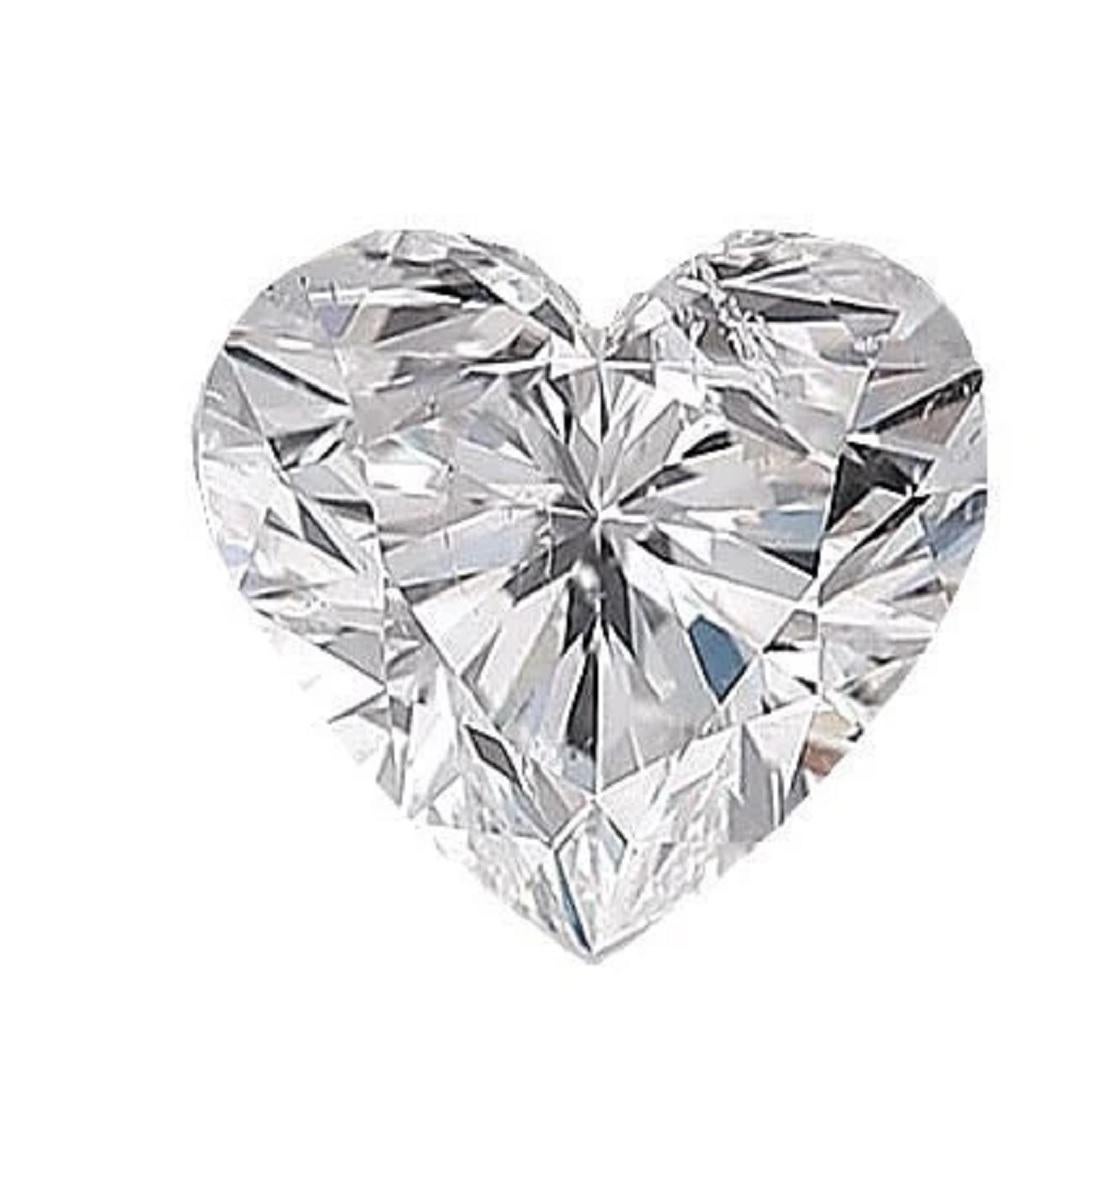 Amazing GIA certified heart shape diamond pendant perfect present!
the main stone weights 2 carats and has been certified by GIA

